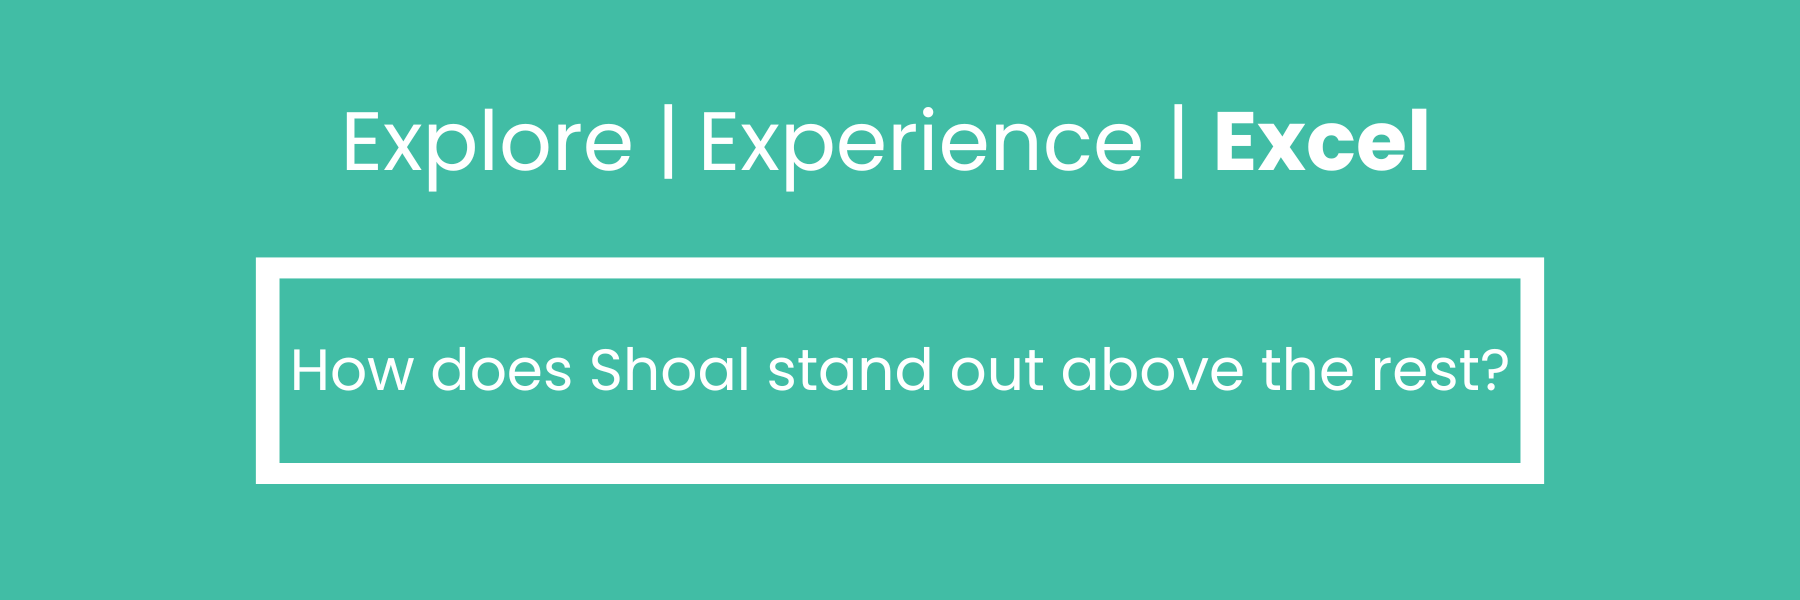 ShoalGrad Excel - How does Shoal stand out above the rest?